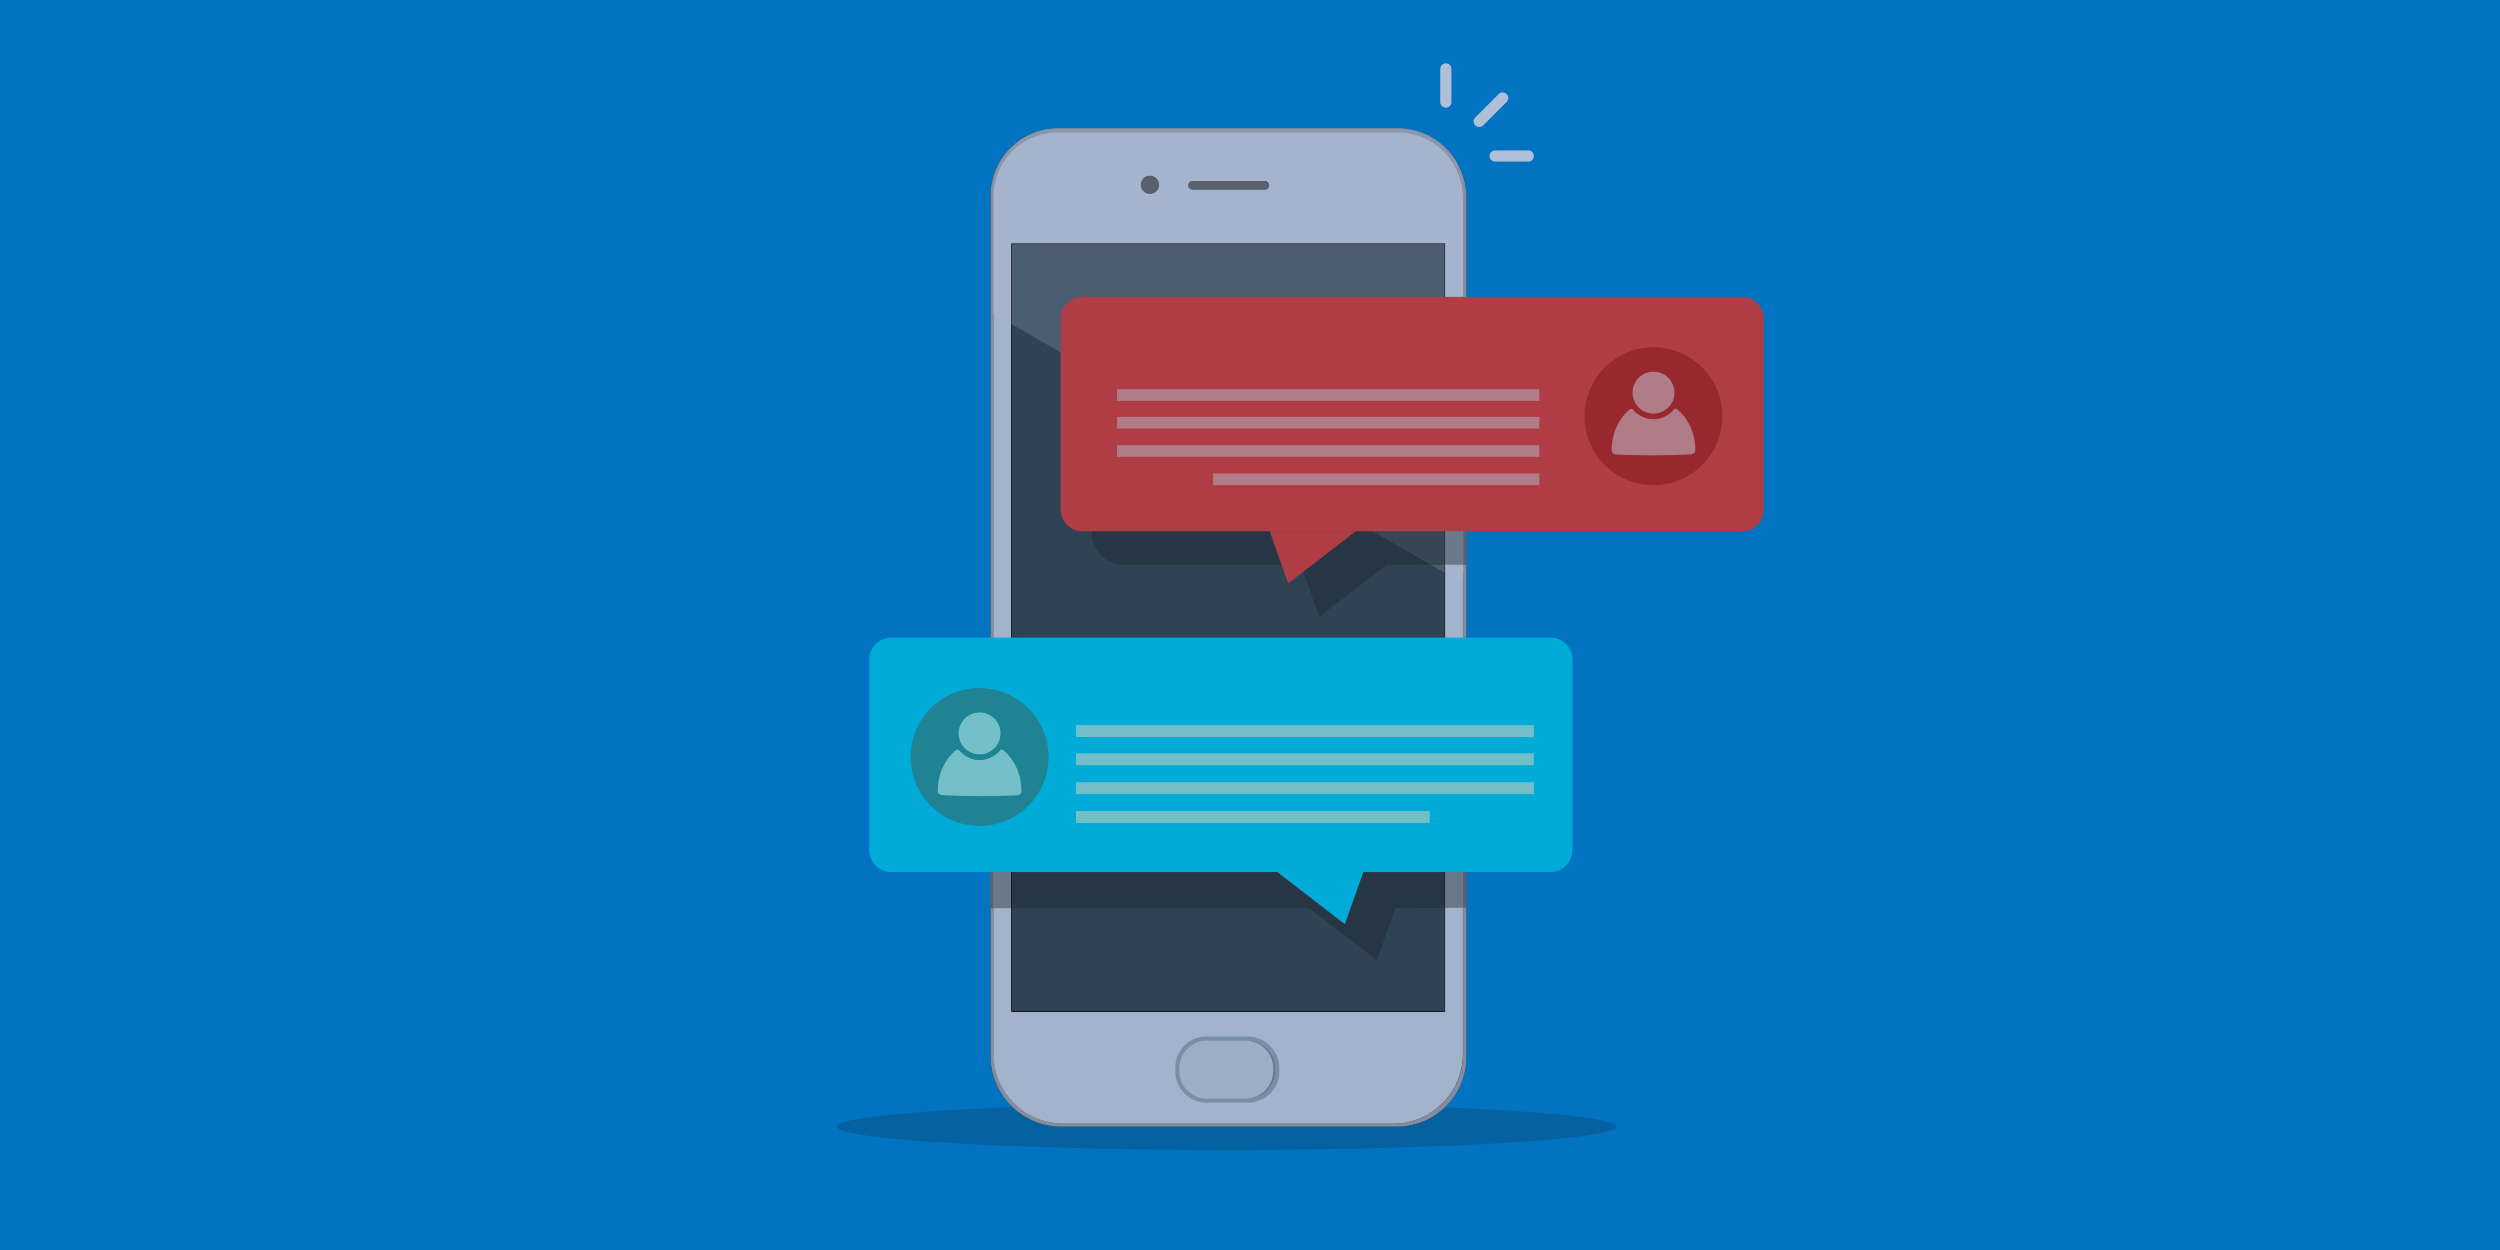 Push Notifications, Defined for Mobile Apps